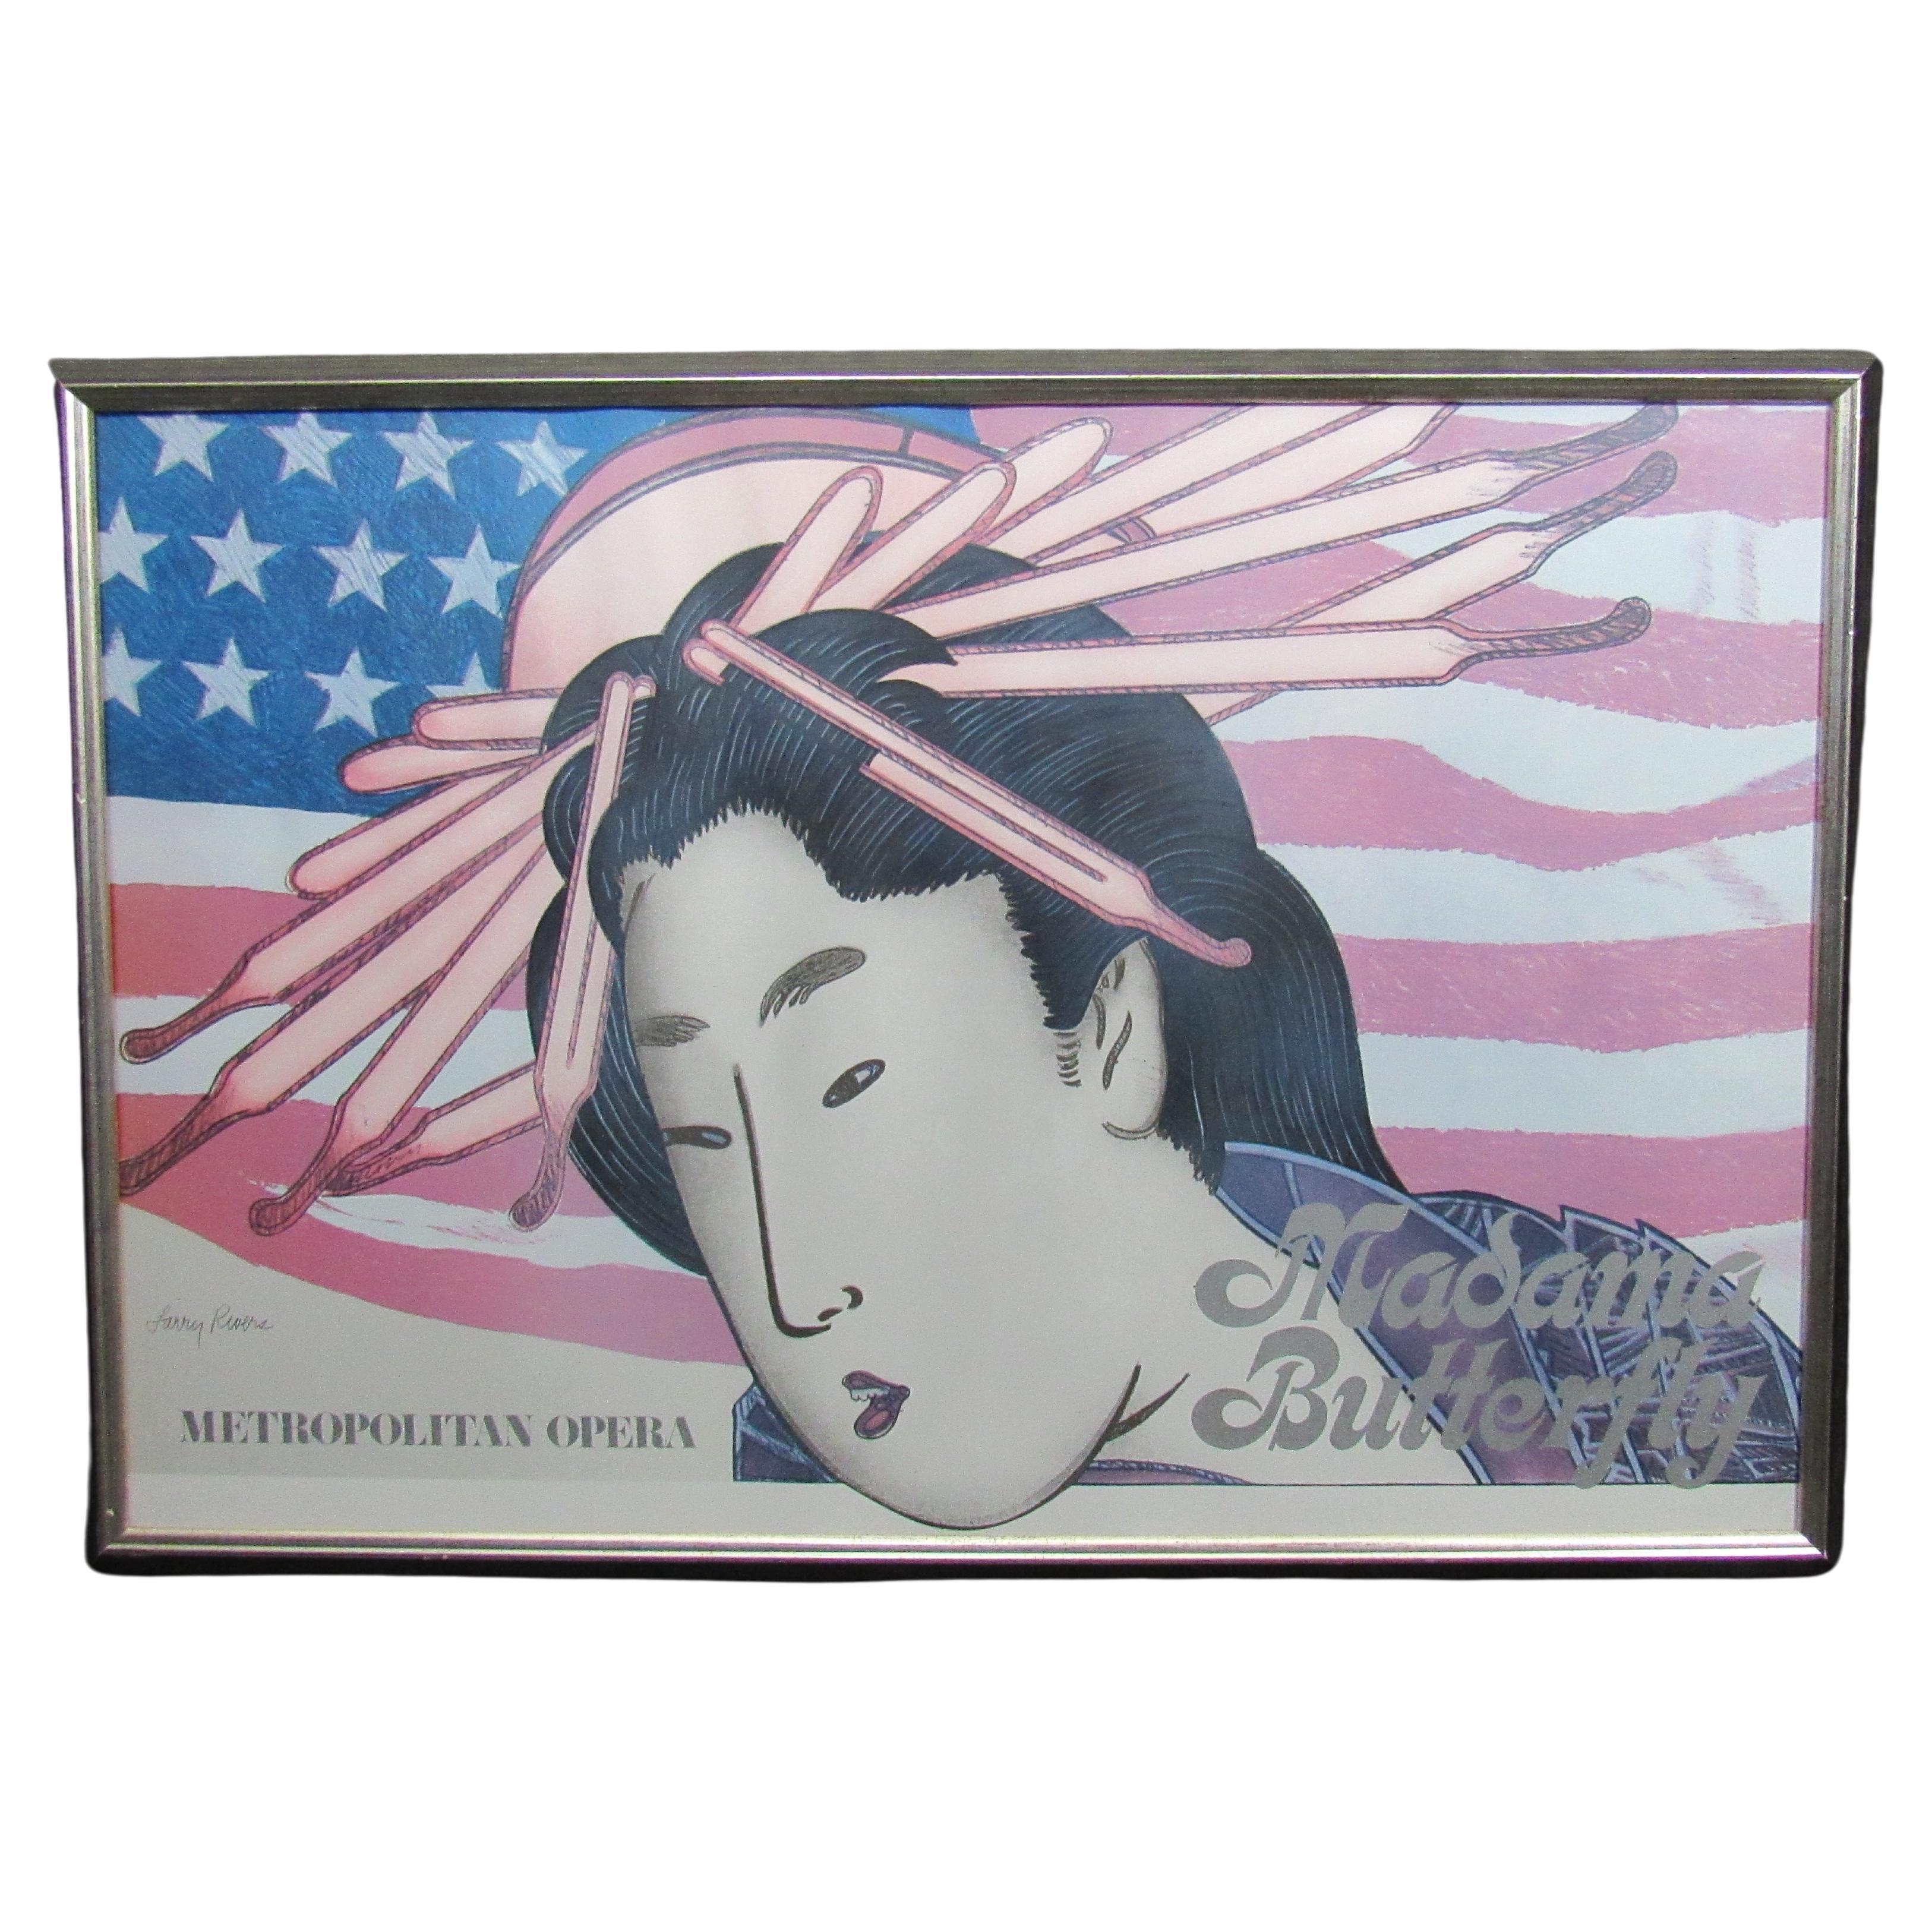 Vintage Metropolitan Opera "Madama Butterfly" Framed Lithograph by Larry Rivers For Sale